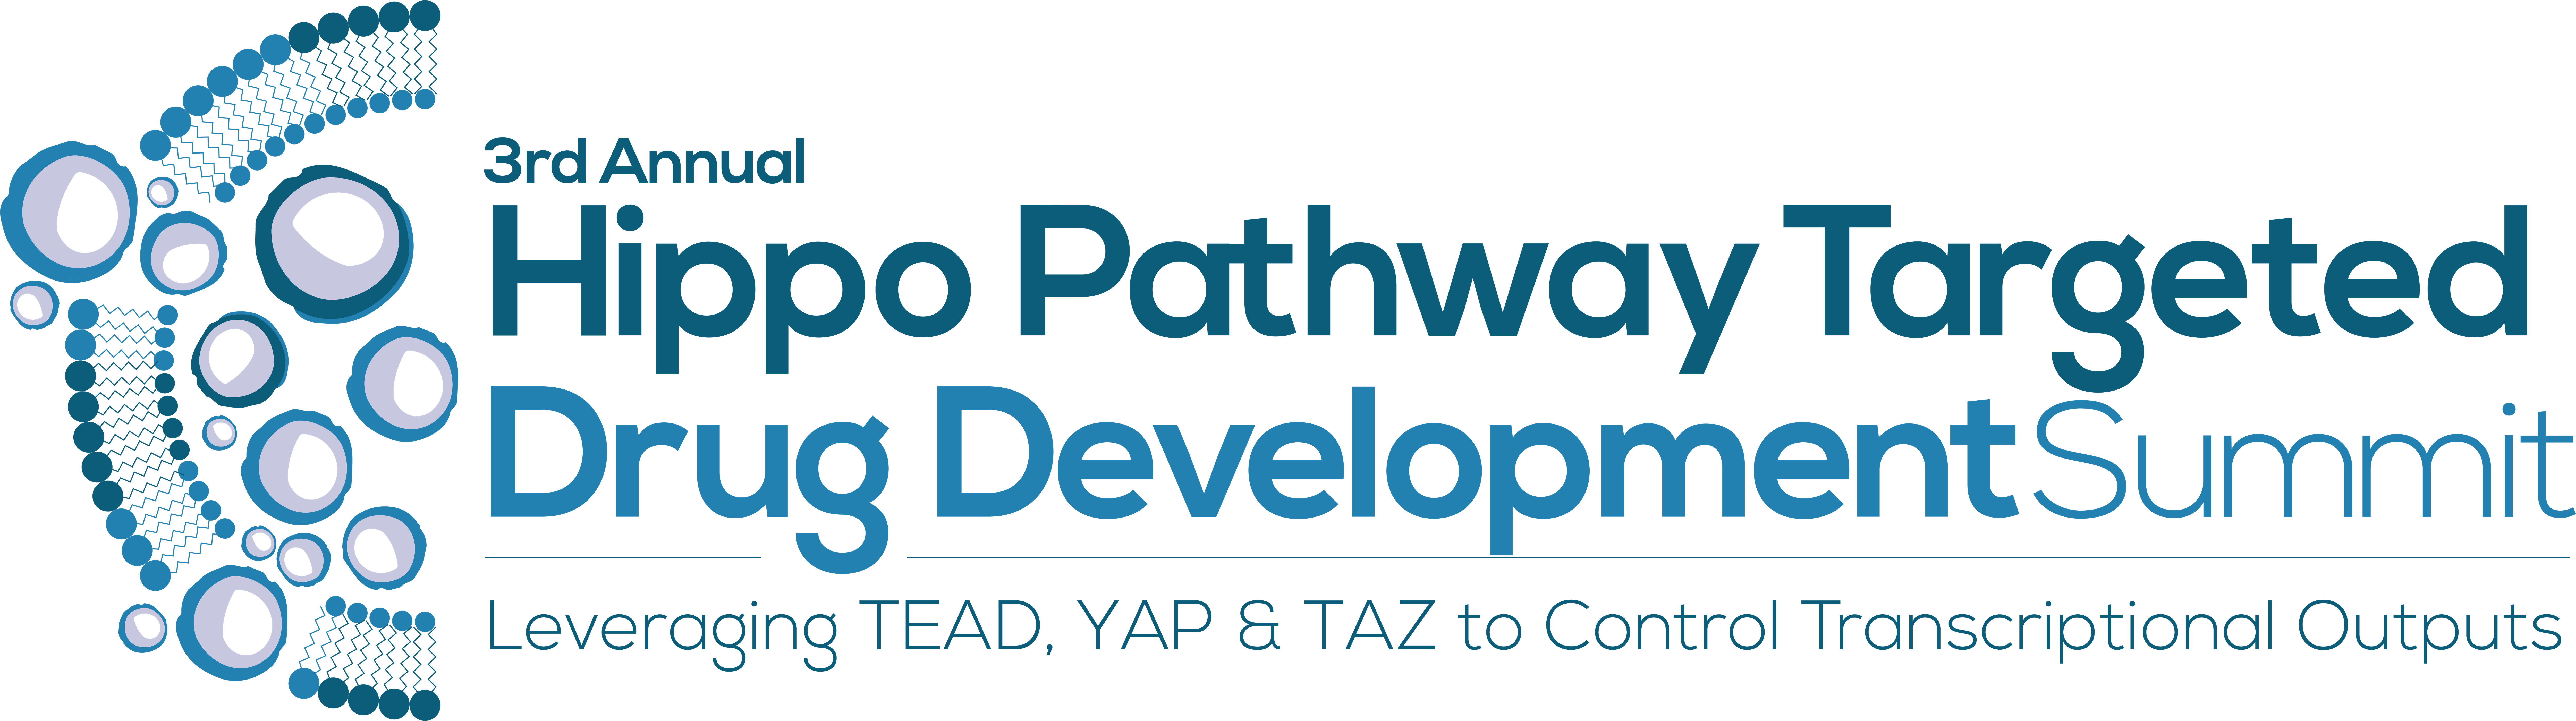 3rd Annual Hippo Pathway Targeted Drug Development Summit